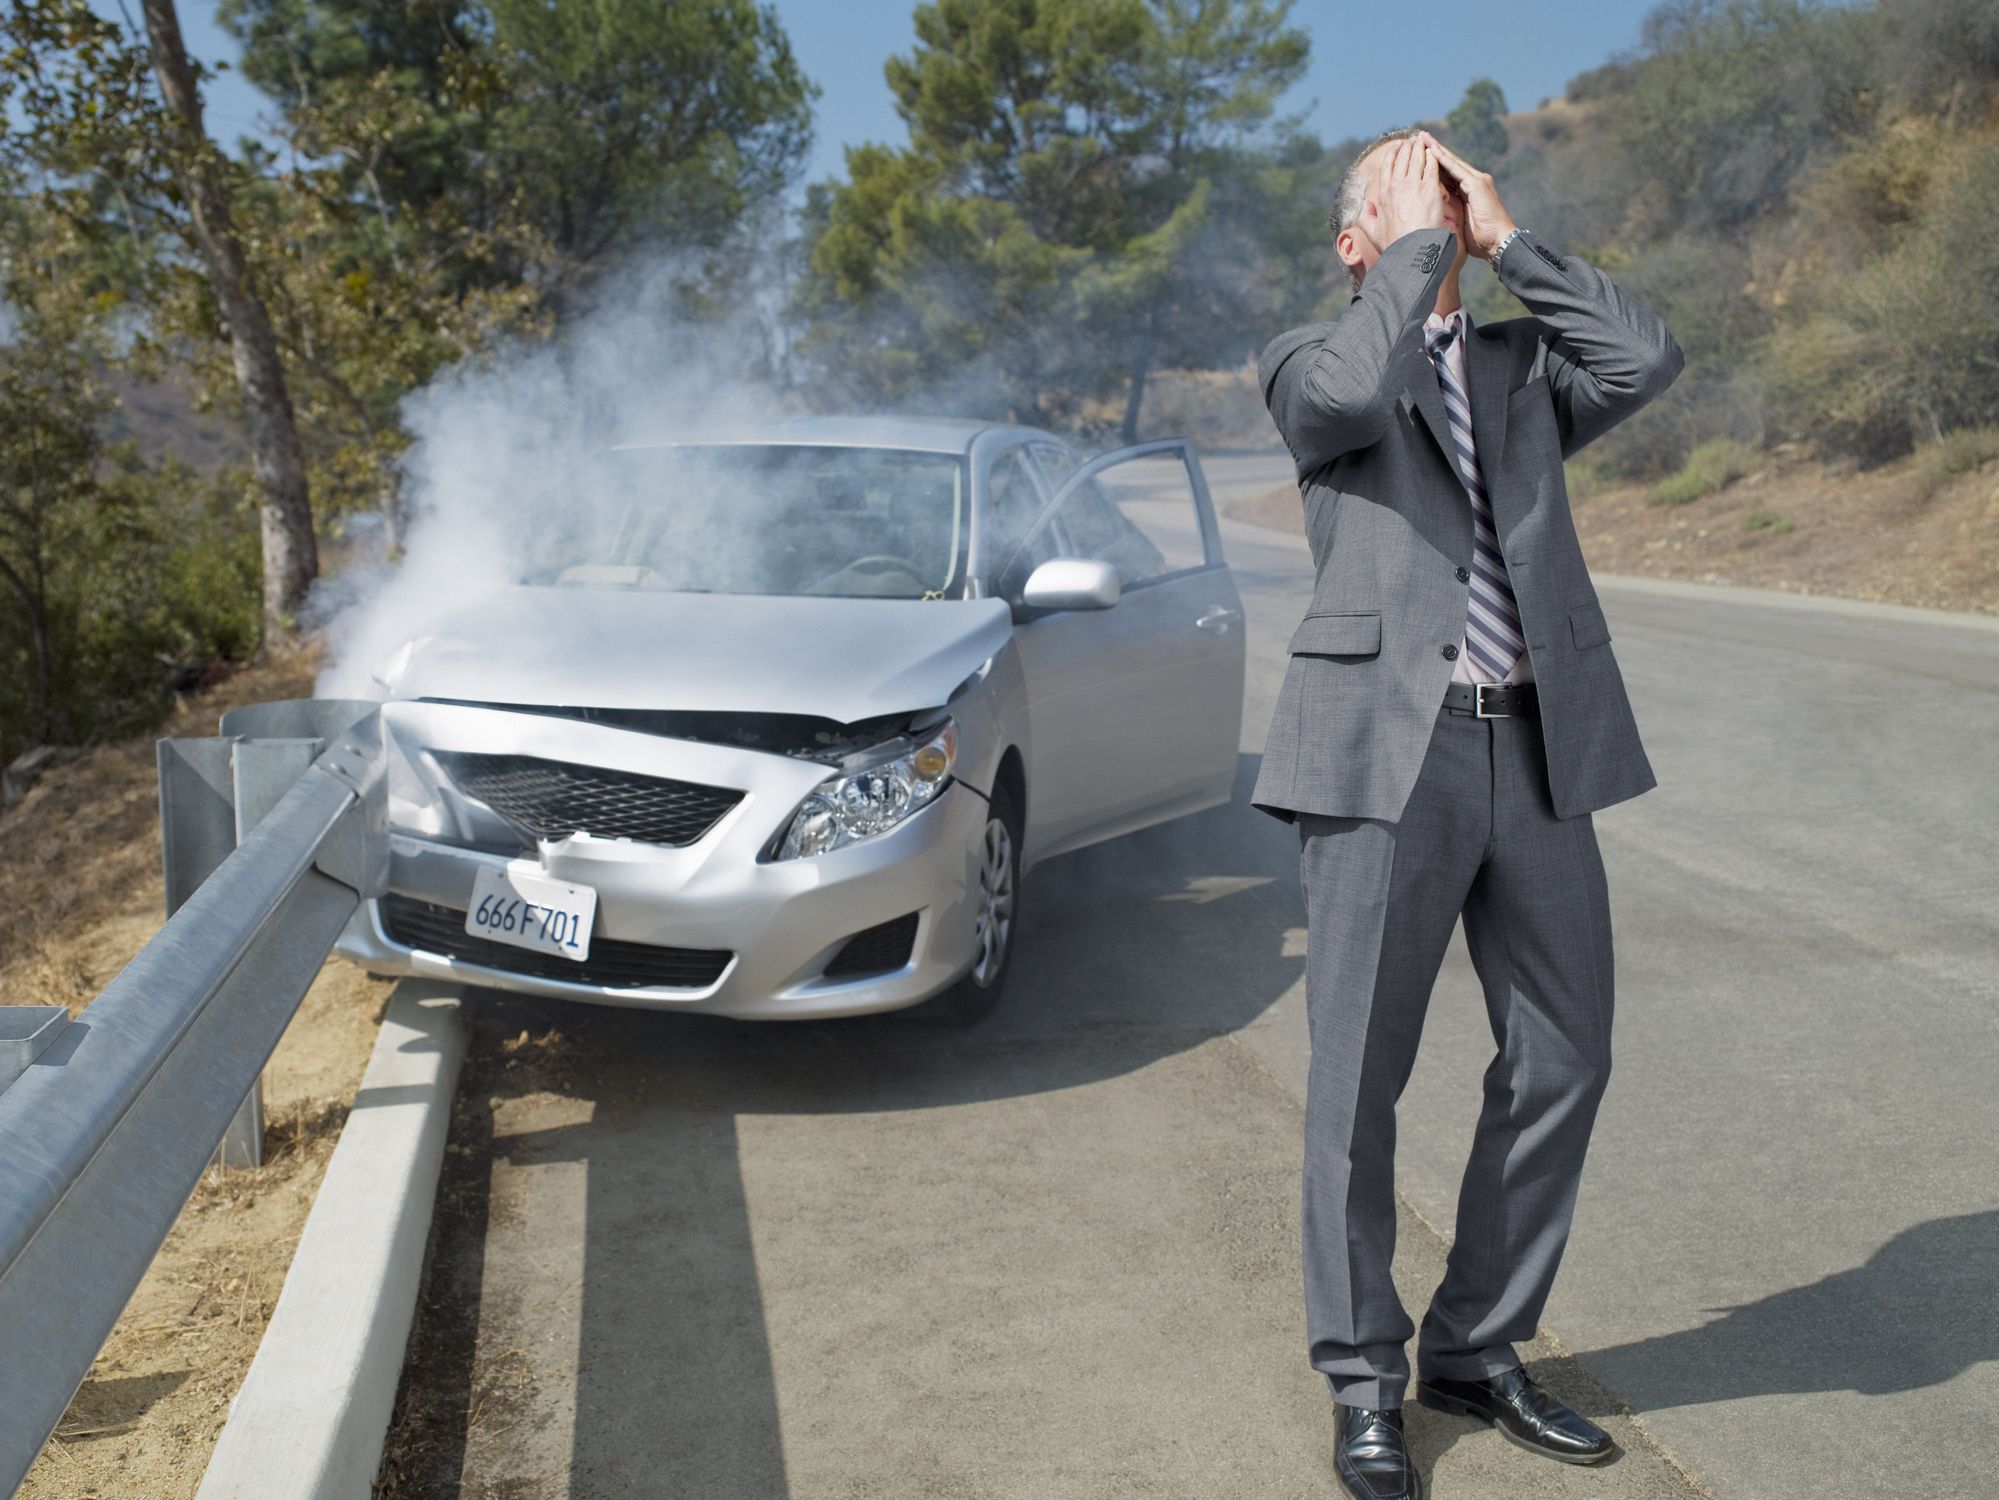 9 Signs Your Car is a Total Loss After an Accident